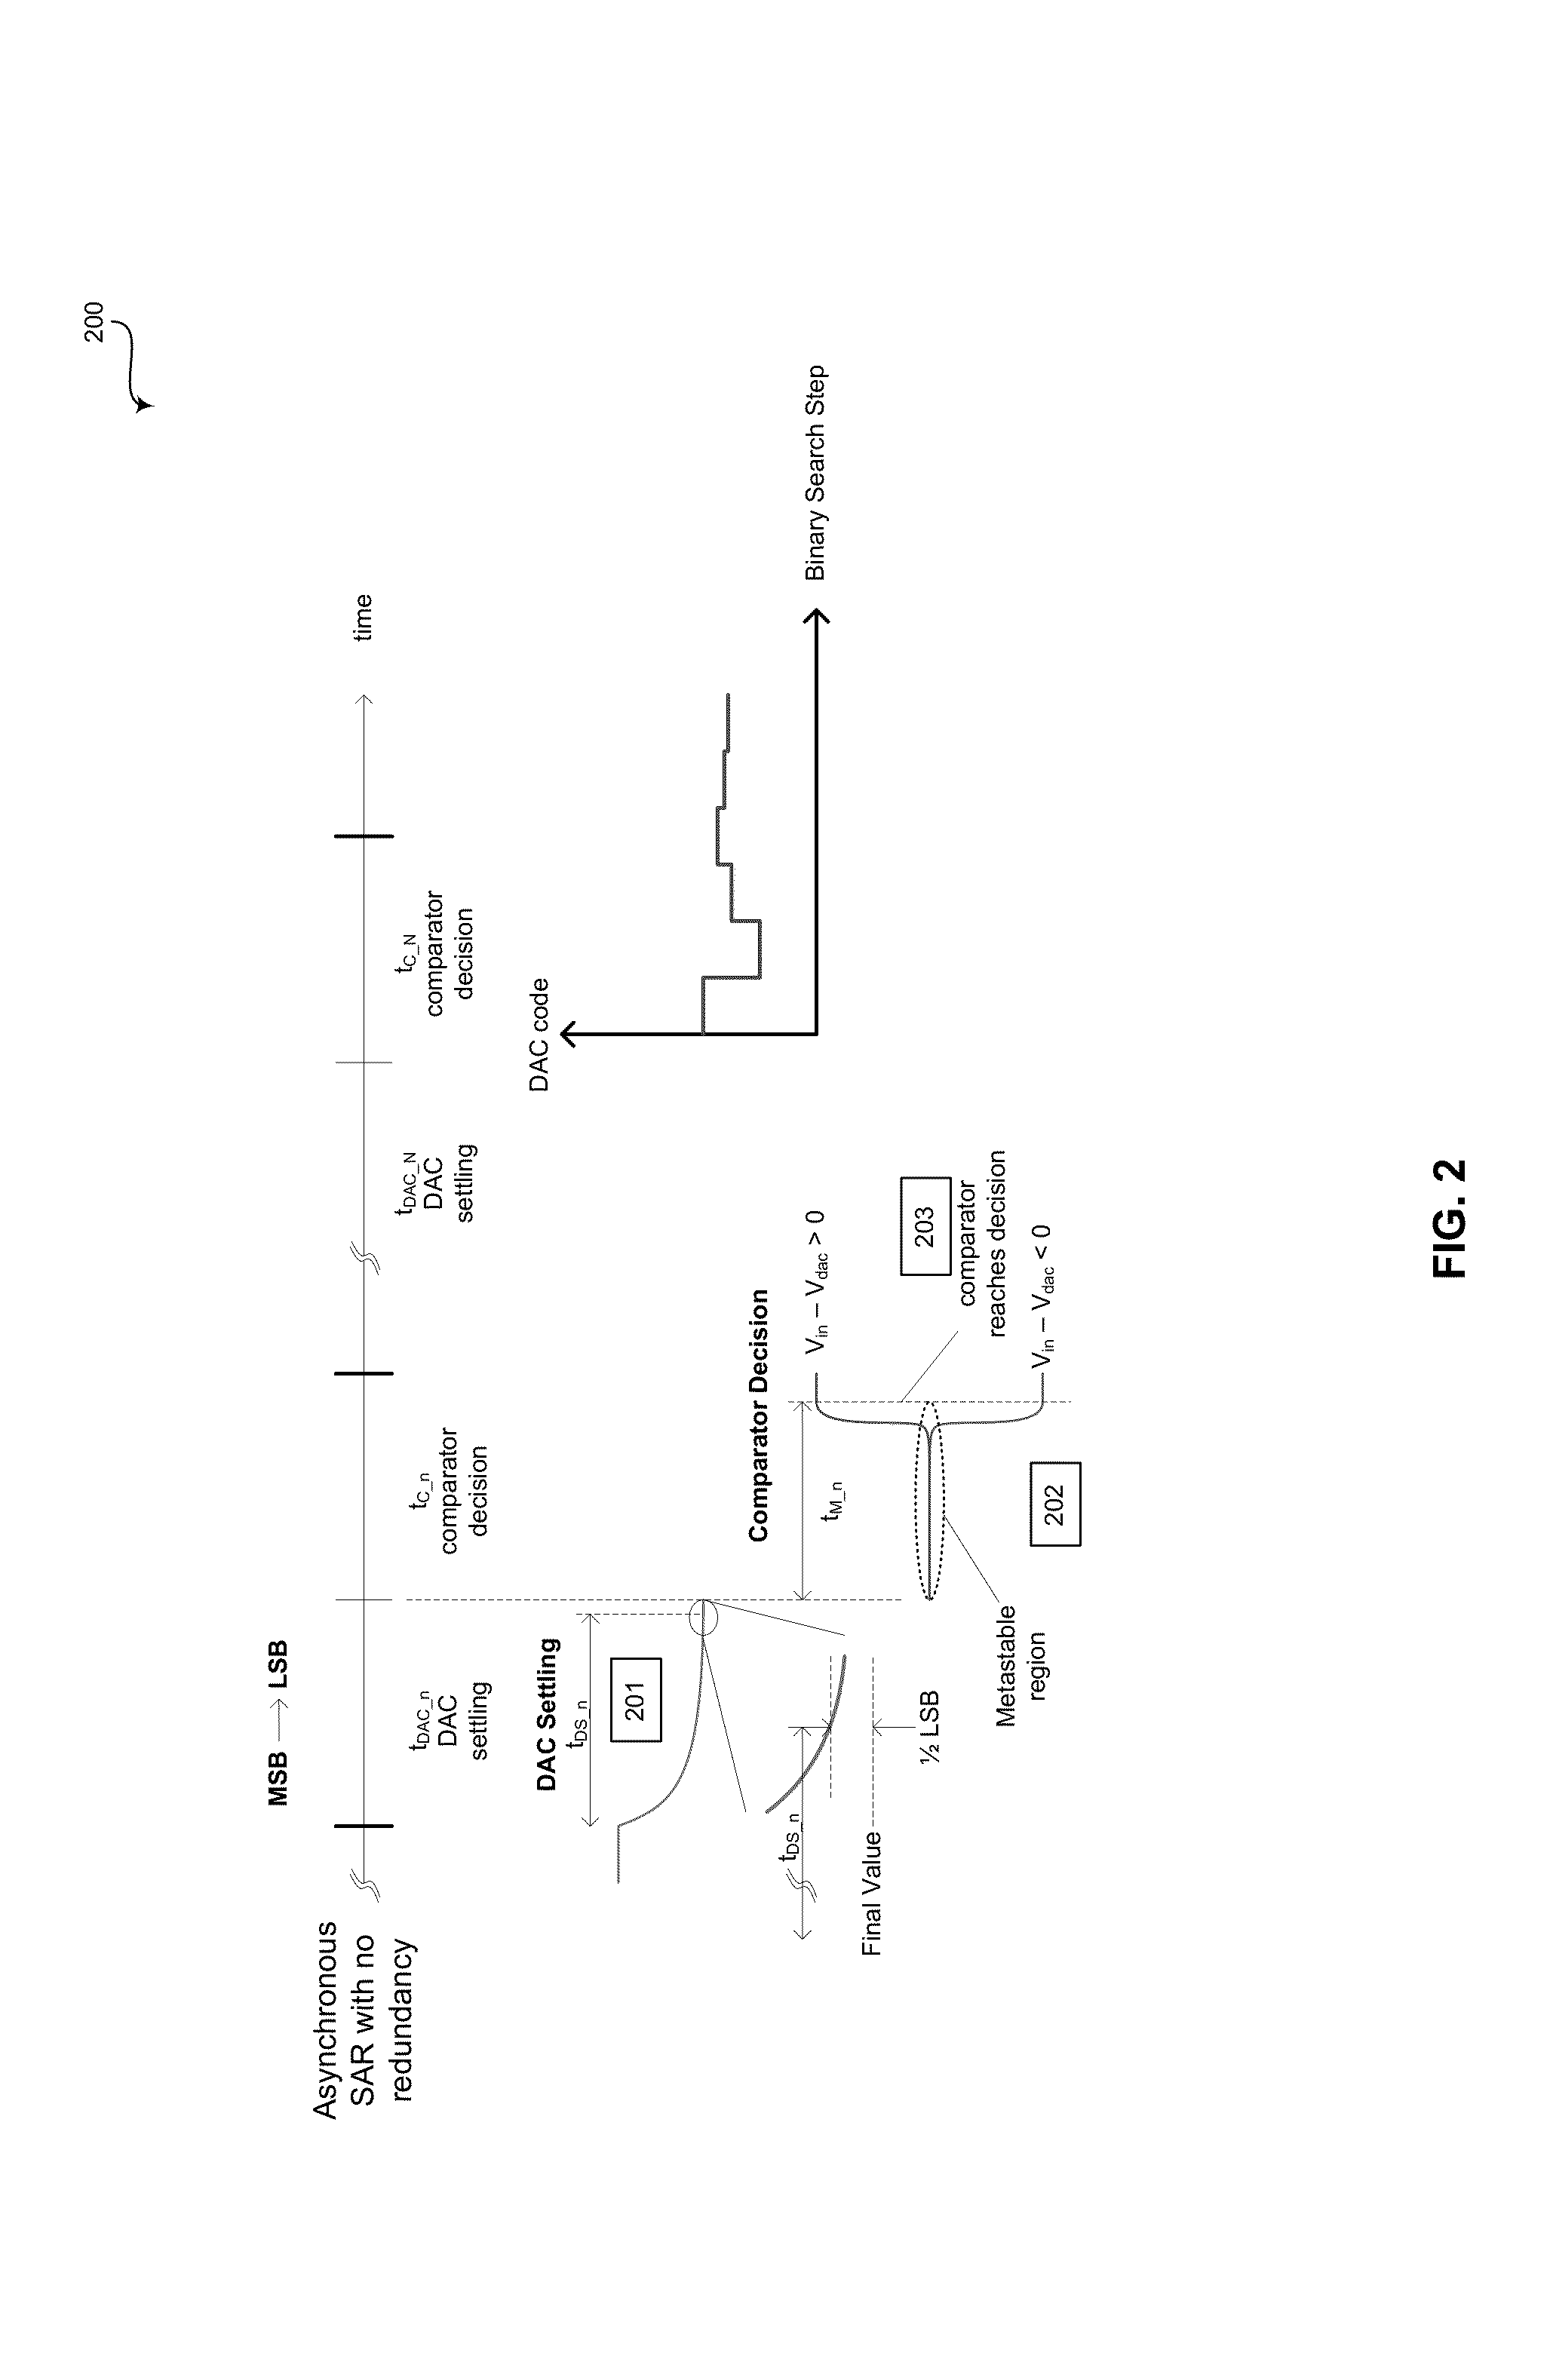 Method and system for asynchronous successive approximation register (SAR) analog-to-digital converters (ADCS)